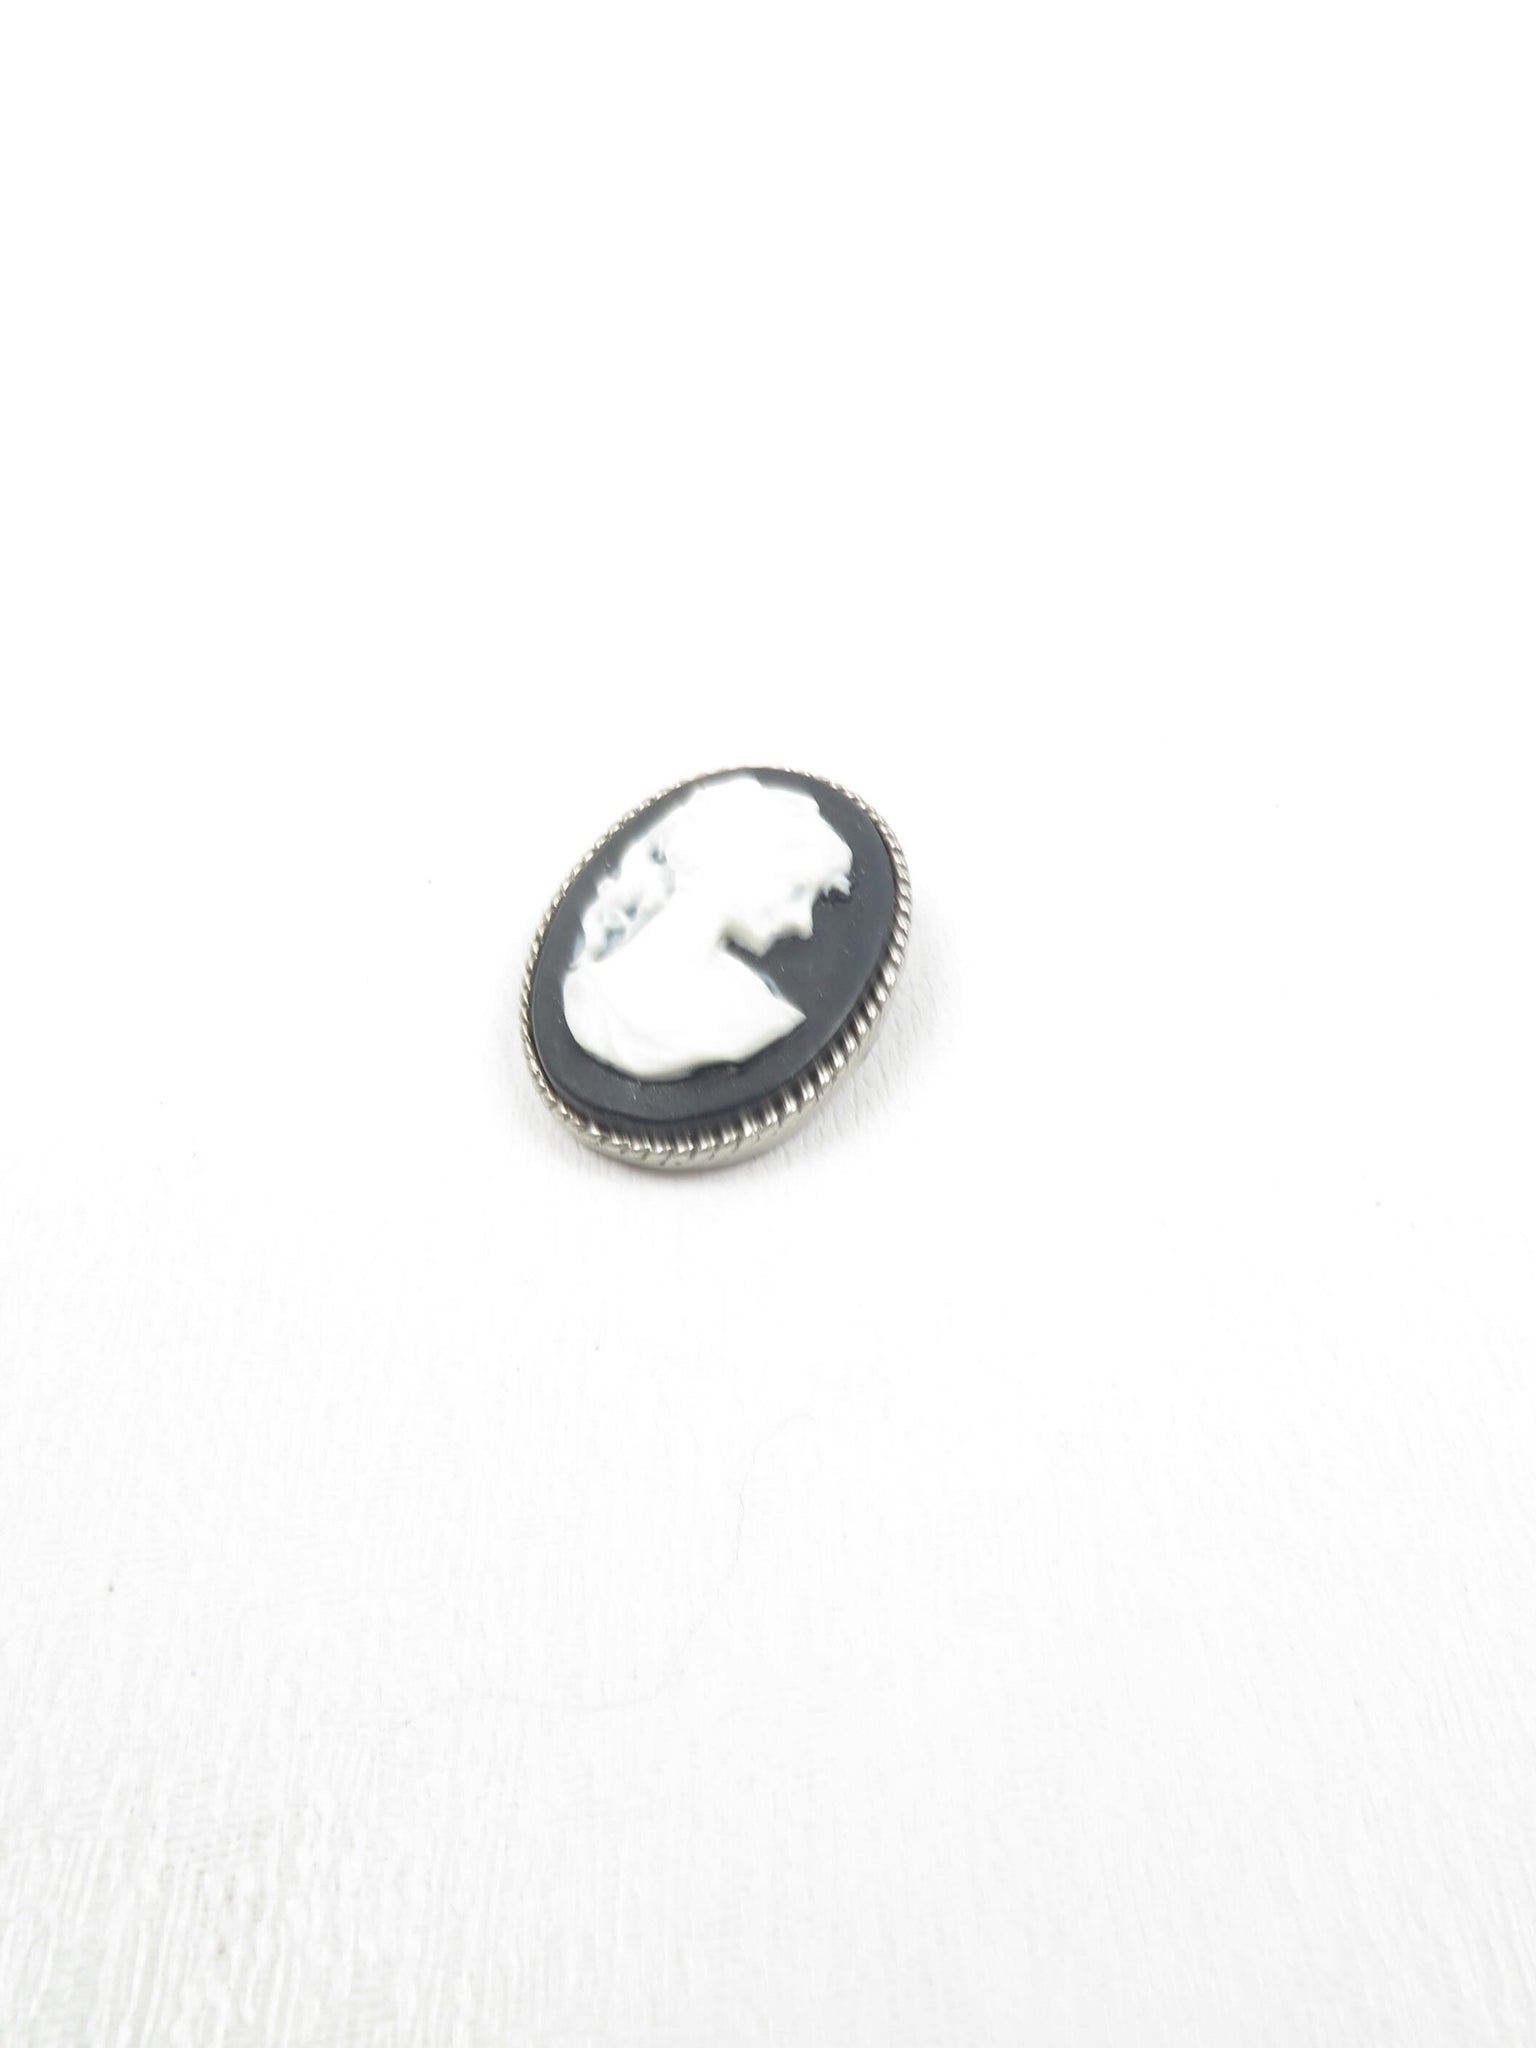 Black & White Vintage Style Cameo Brooch - The Harlequin